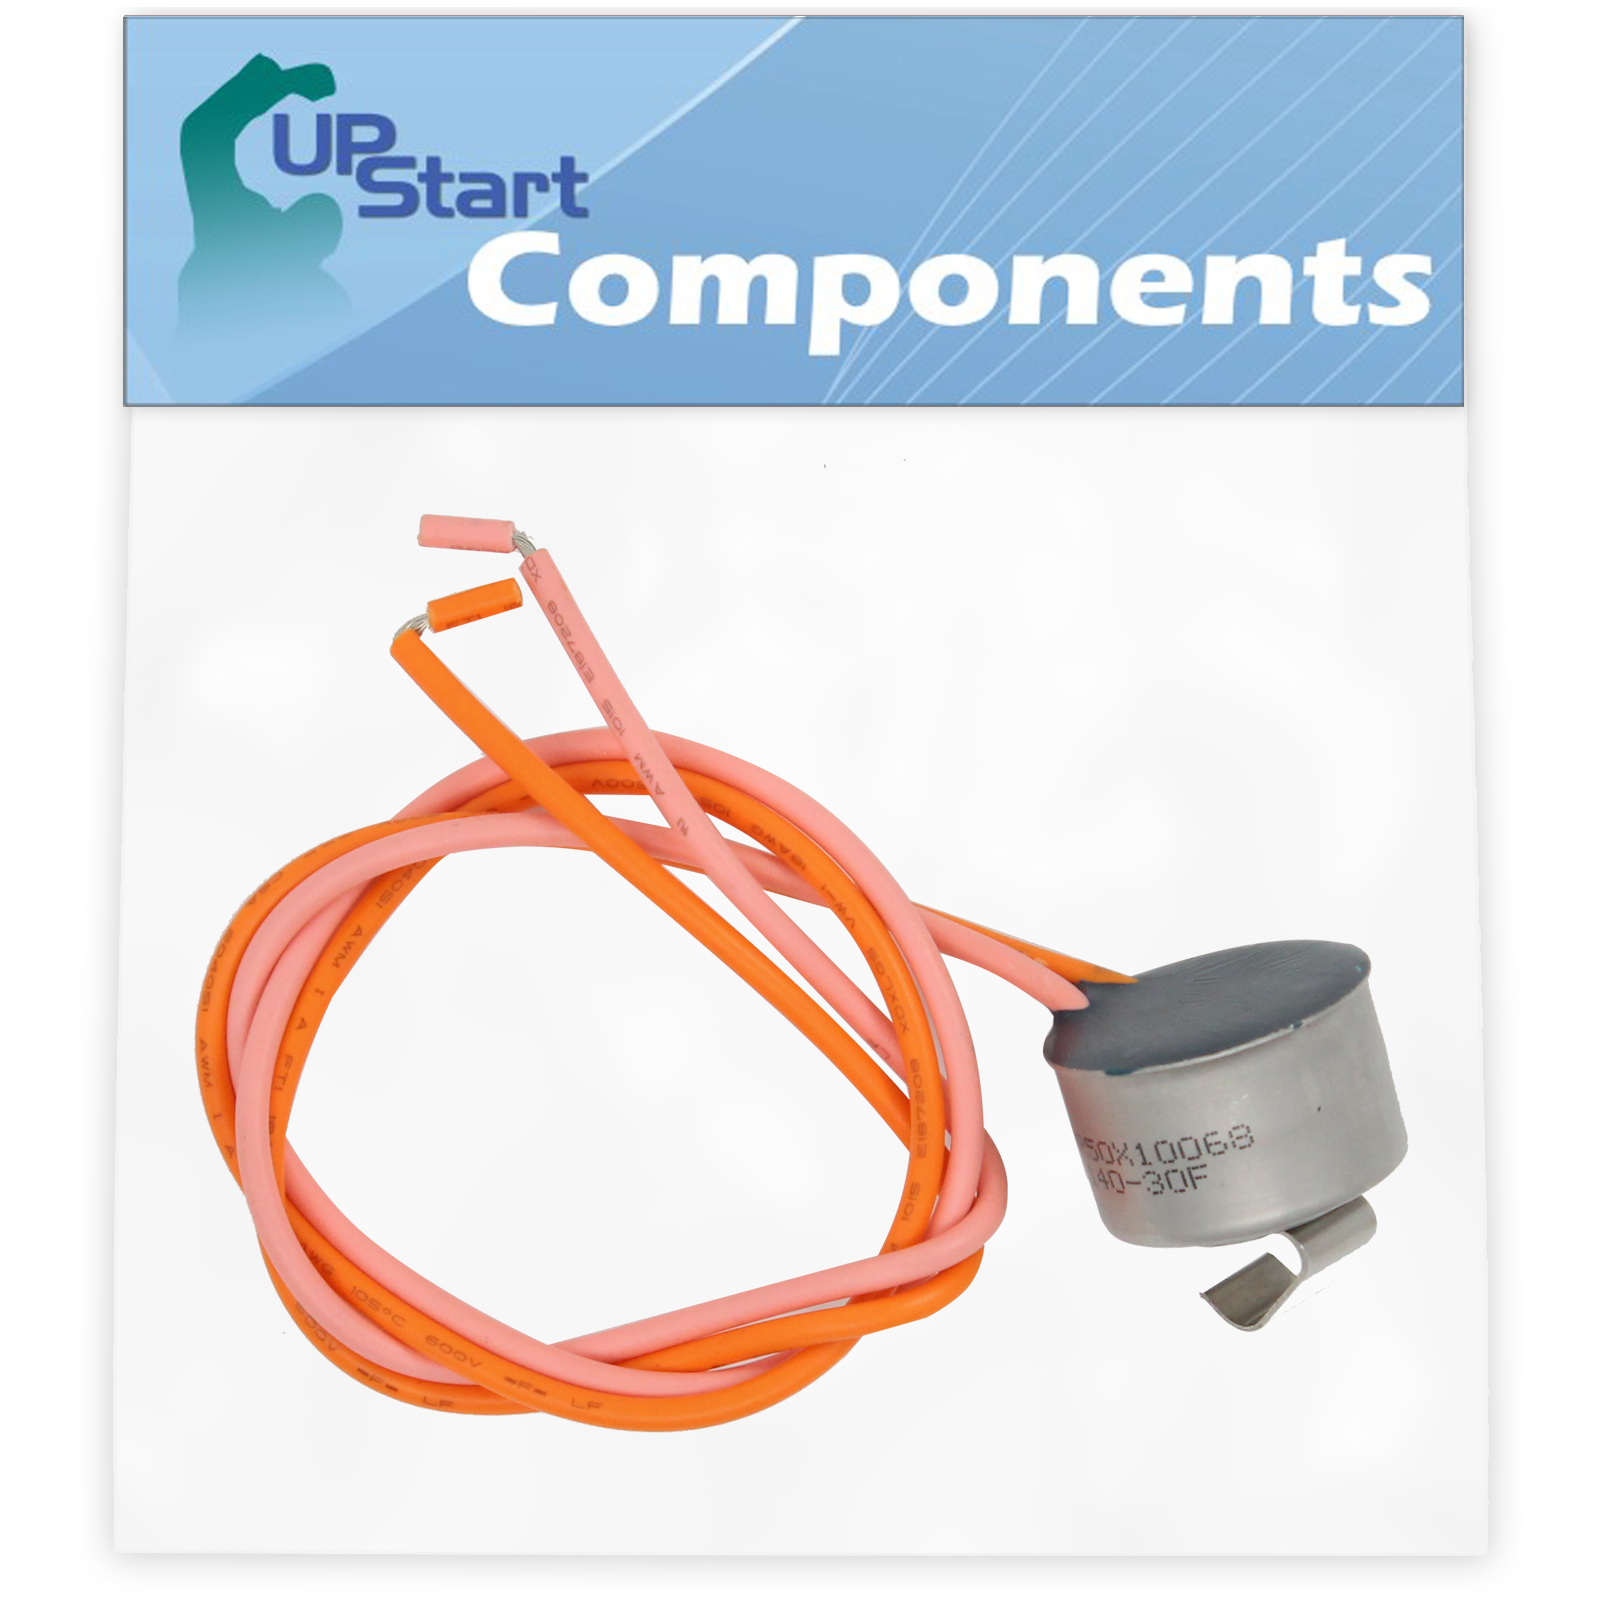 WR50X10068 Defrost Thermostat Replacement for General Electric GSH22KGMCAA Refrigerator - Compatible with WR50X10068 Defrost Limiter Thermostat - UpStart Components Brand - image 1 of 2